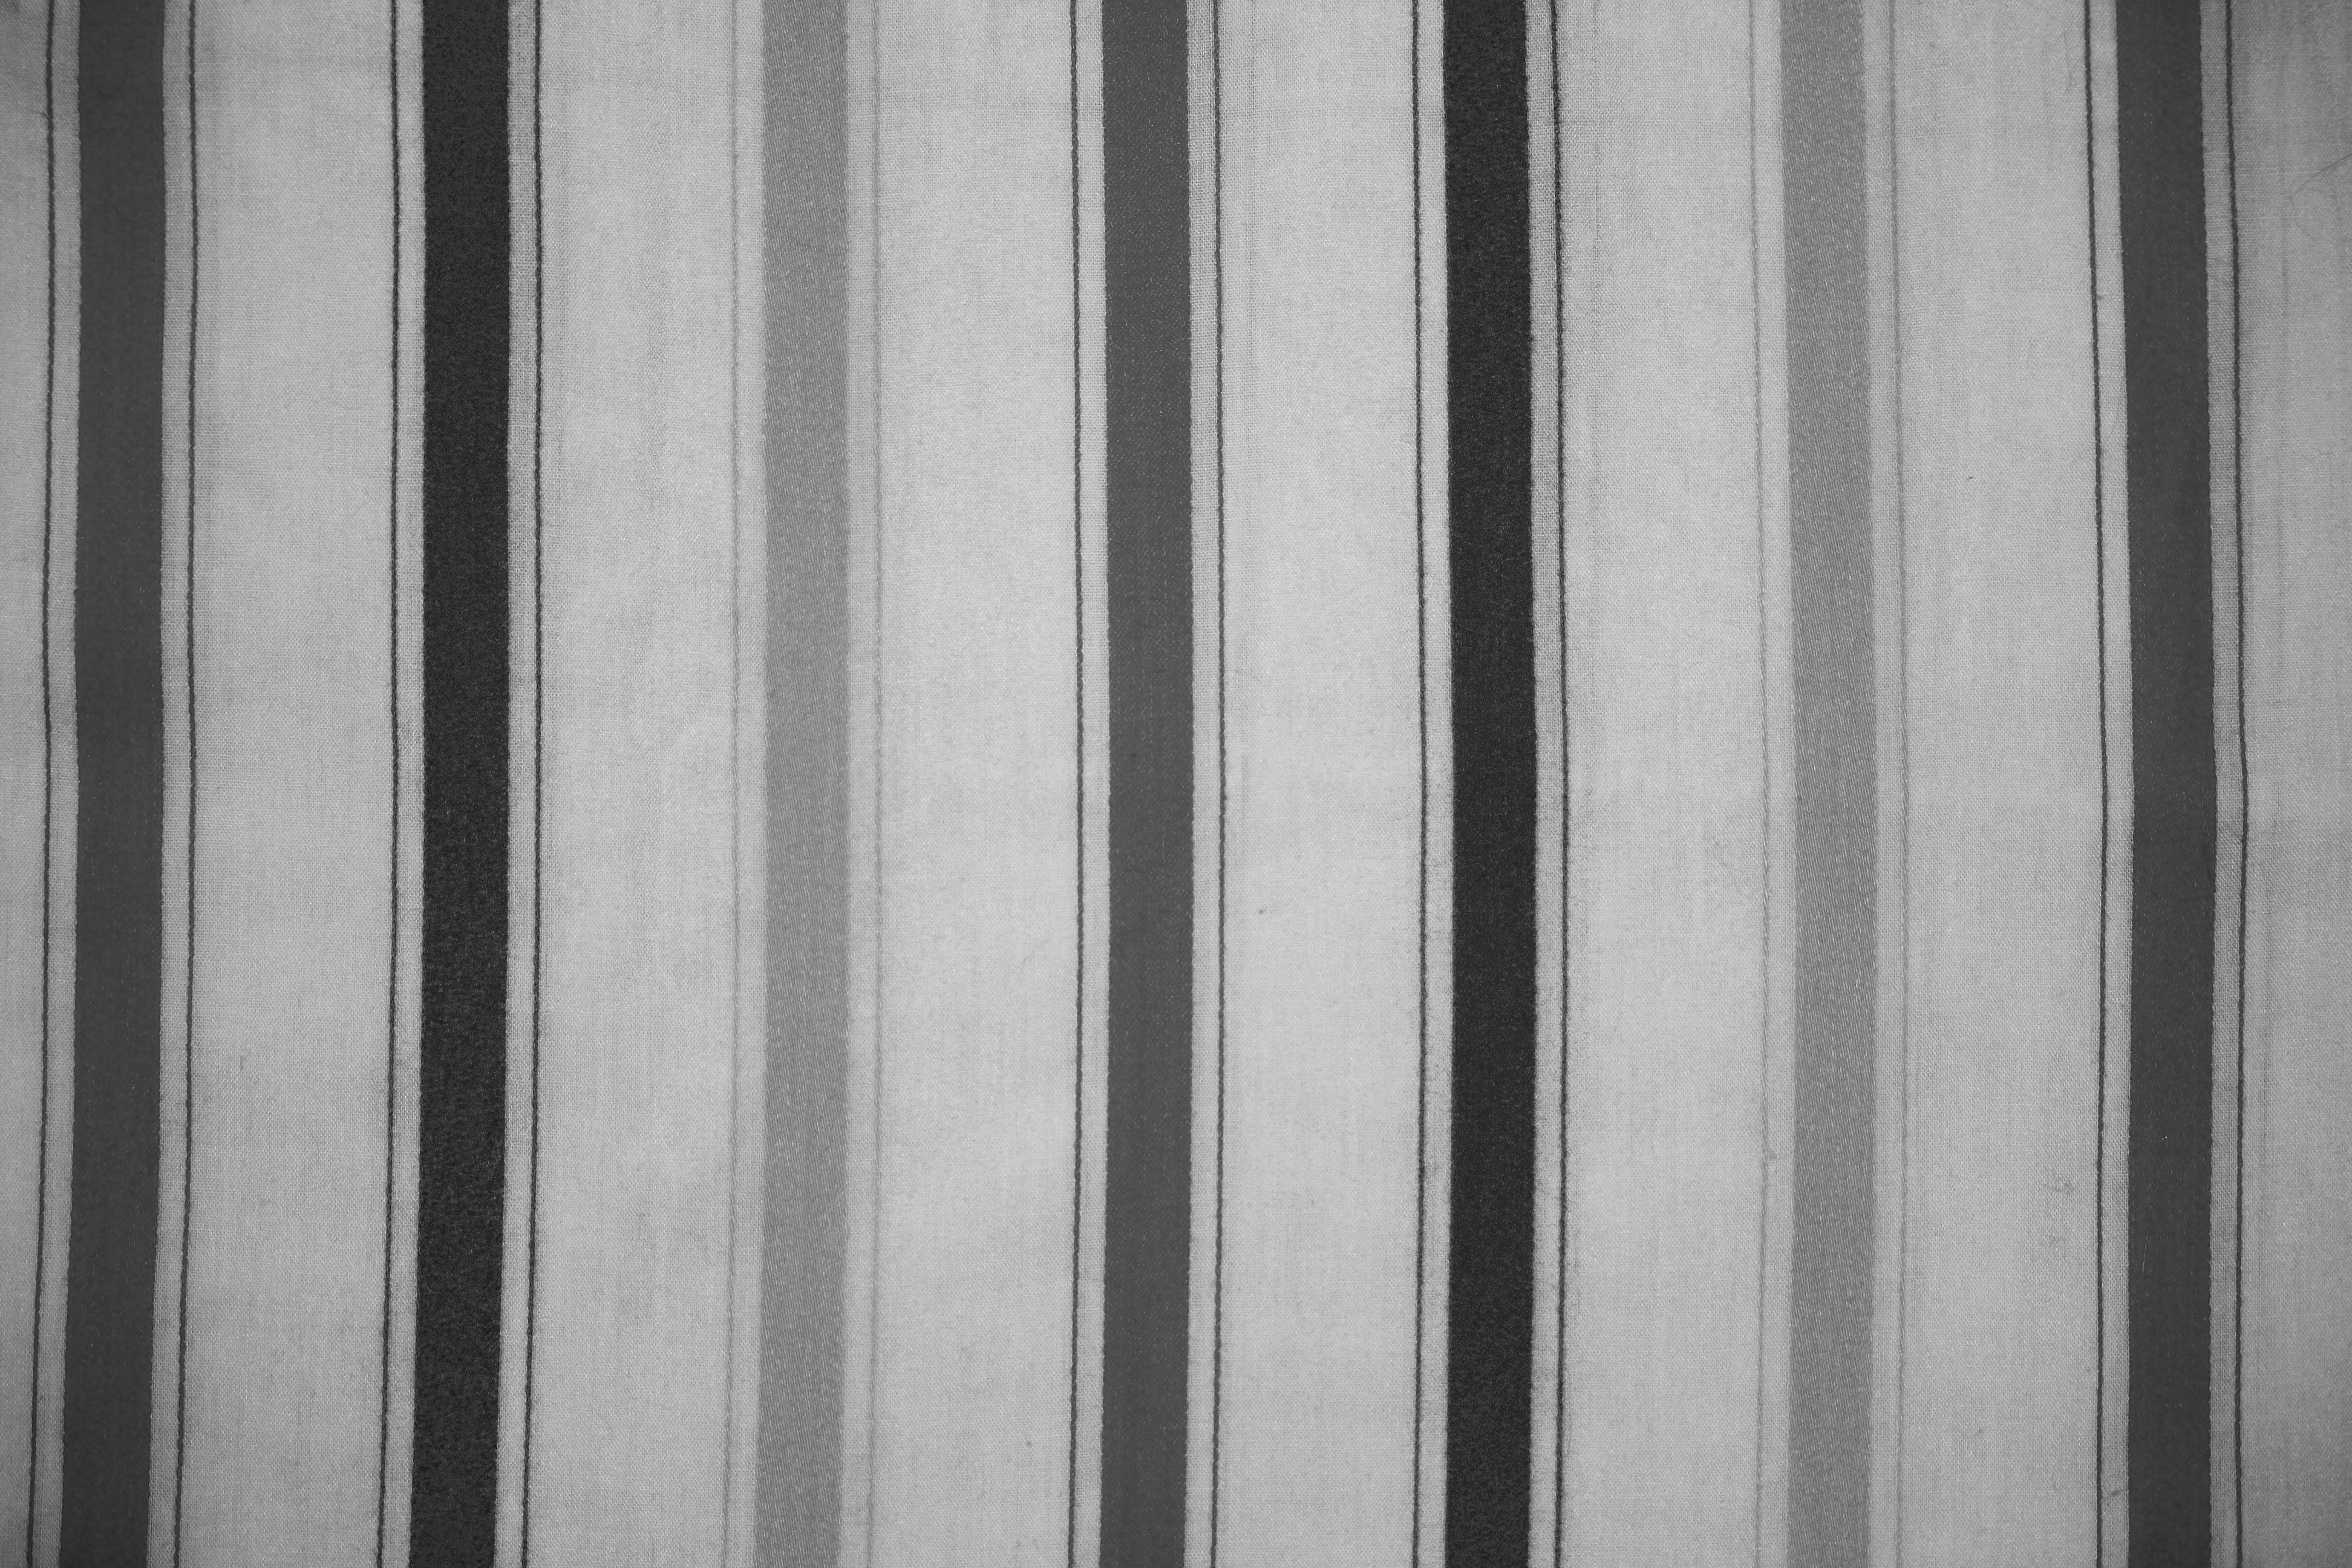 Striped Fabric Texture Gray on White Picture | Free Photograph ...